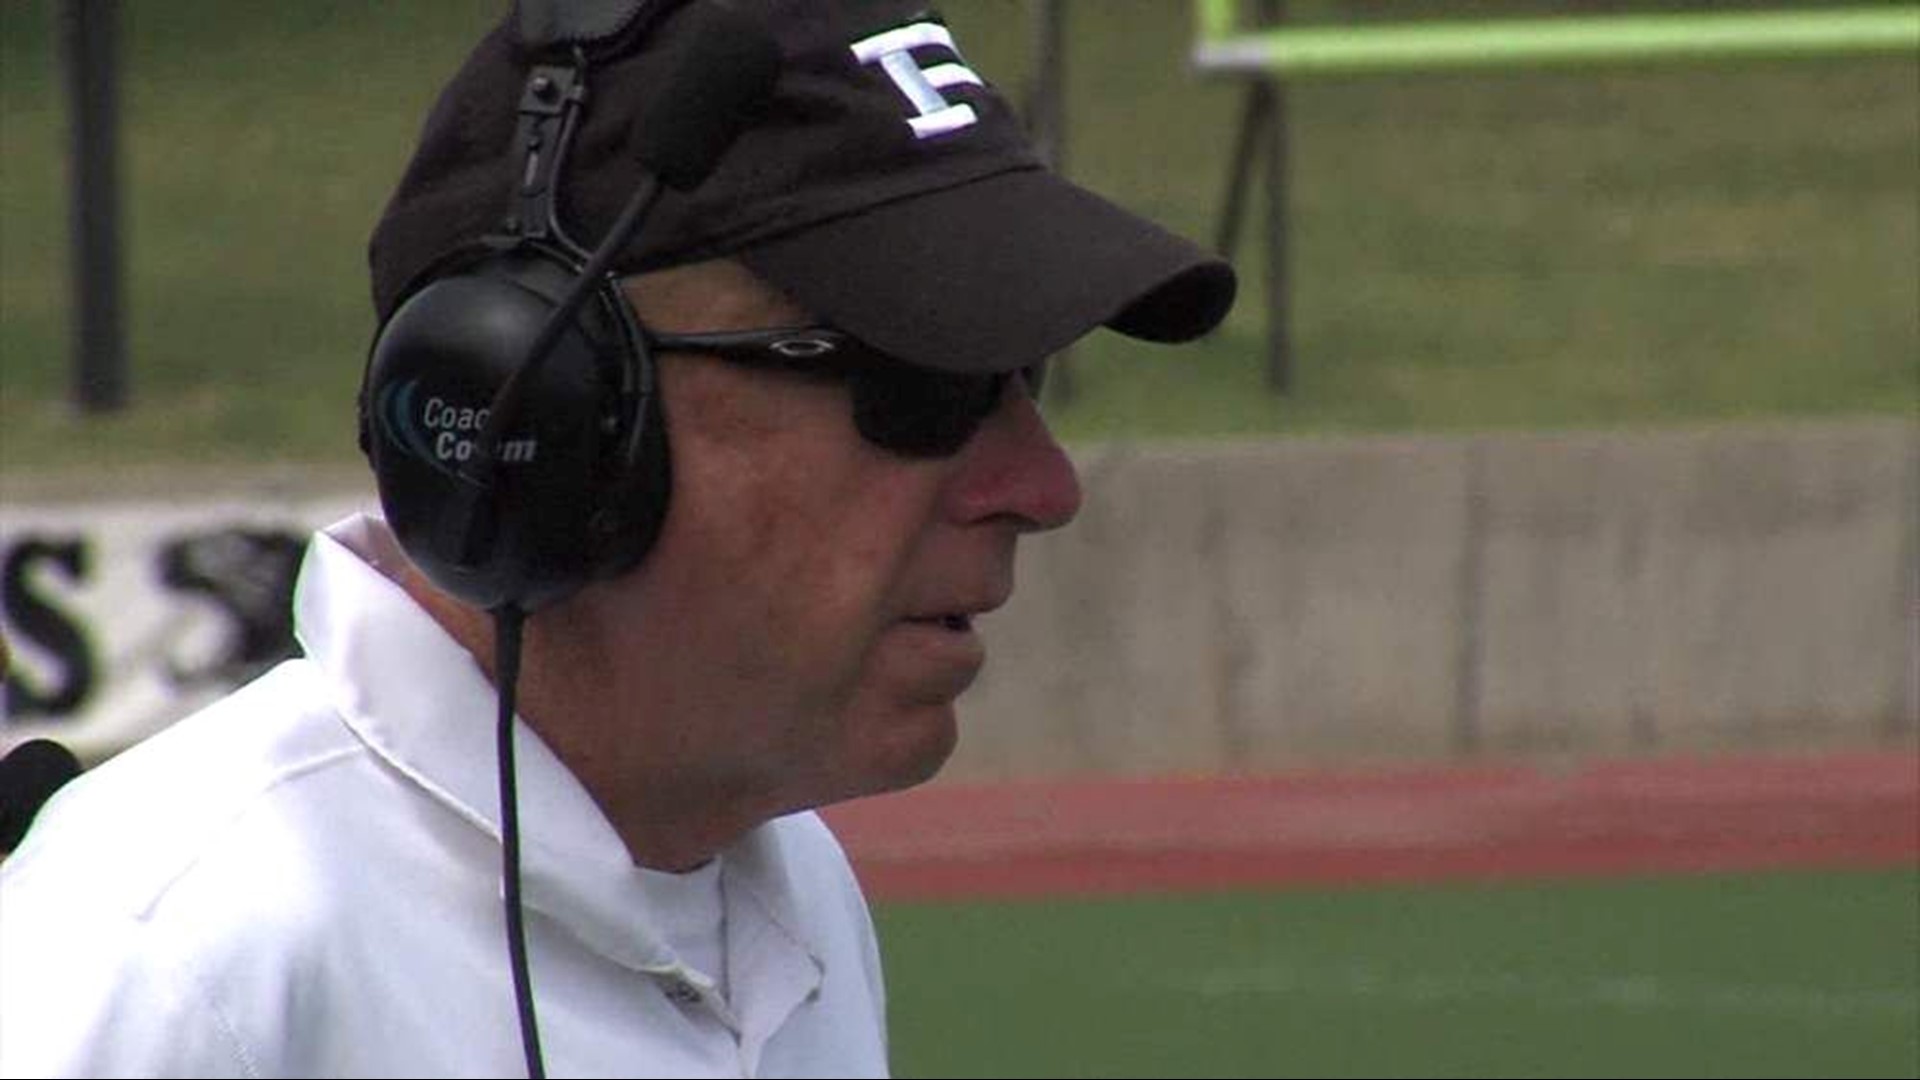 Gaines coached the Panthers during the famous "Friday Night Lights" season, which was chronicled in a book, movie and TV show.